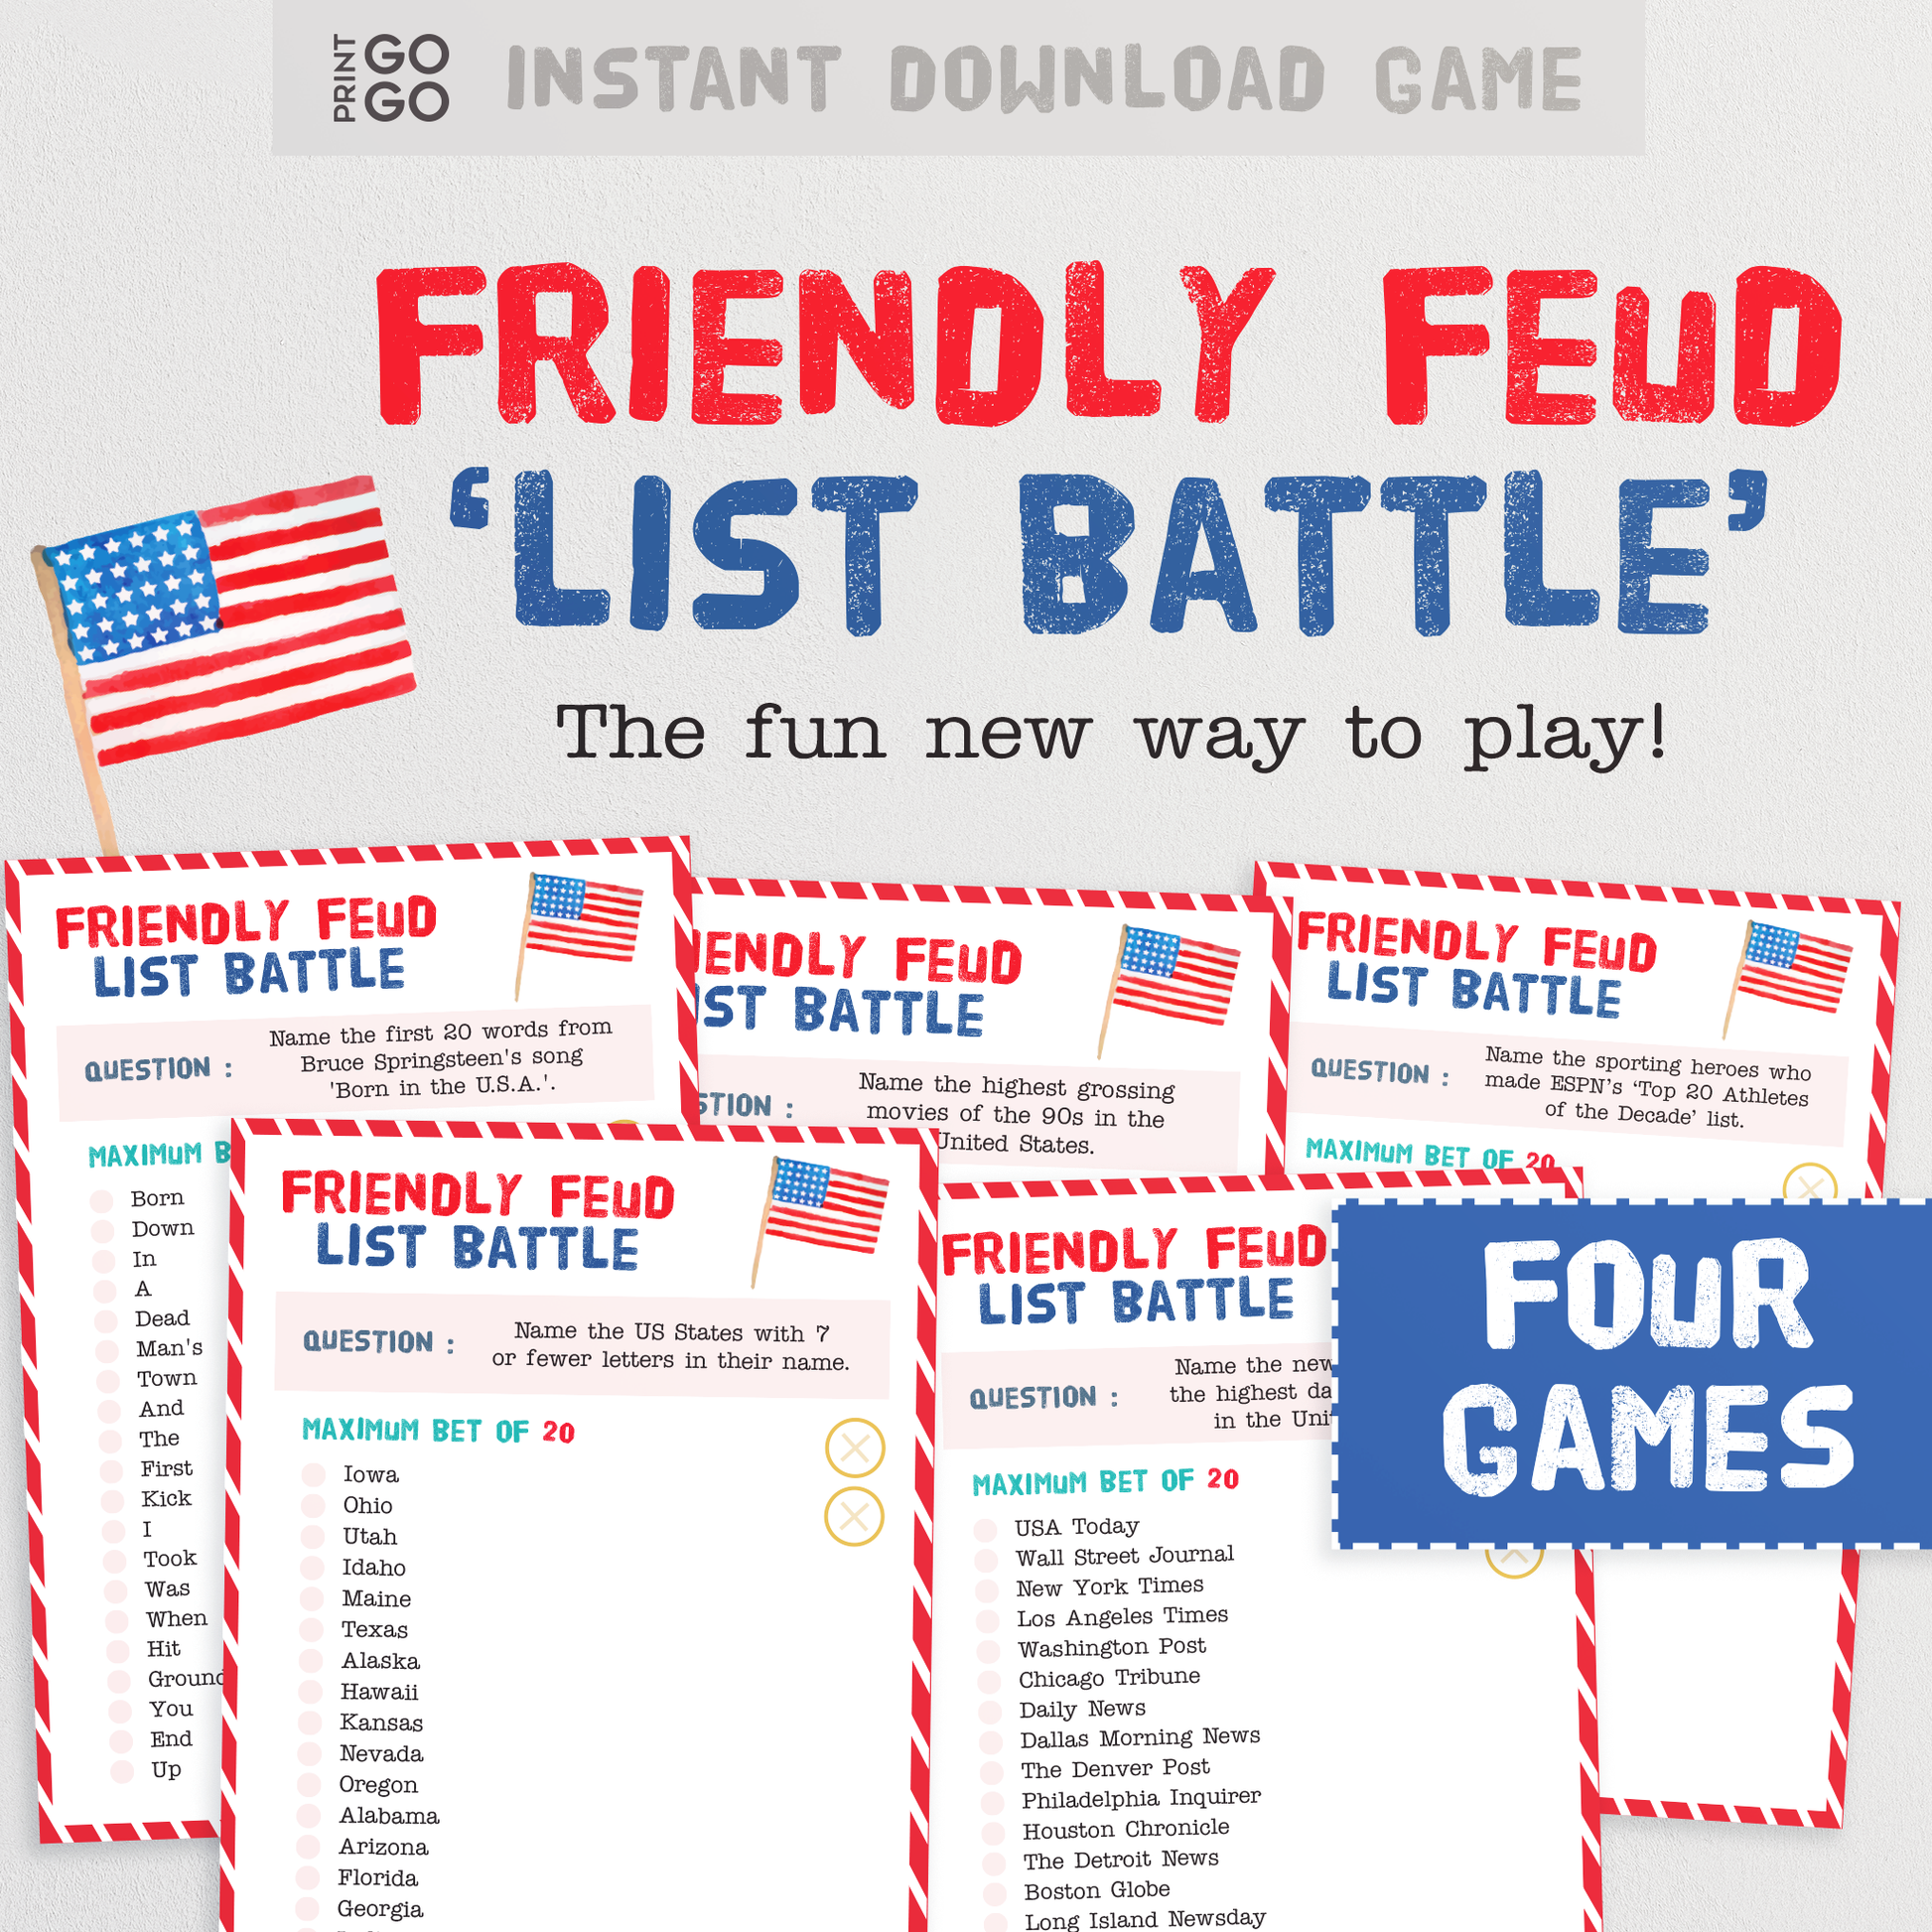 USA Friendly Feud 'List Battle' - The Fun New and Original Way To Play!